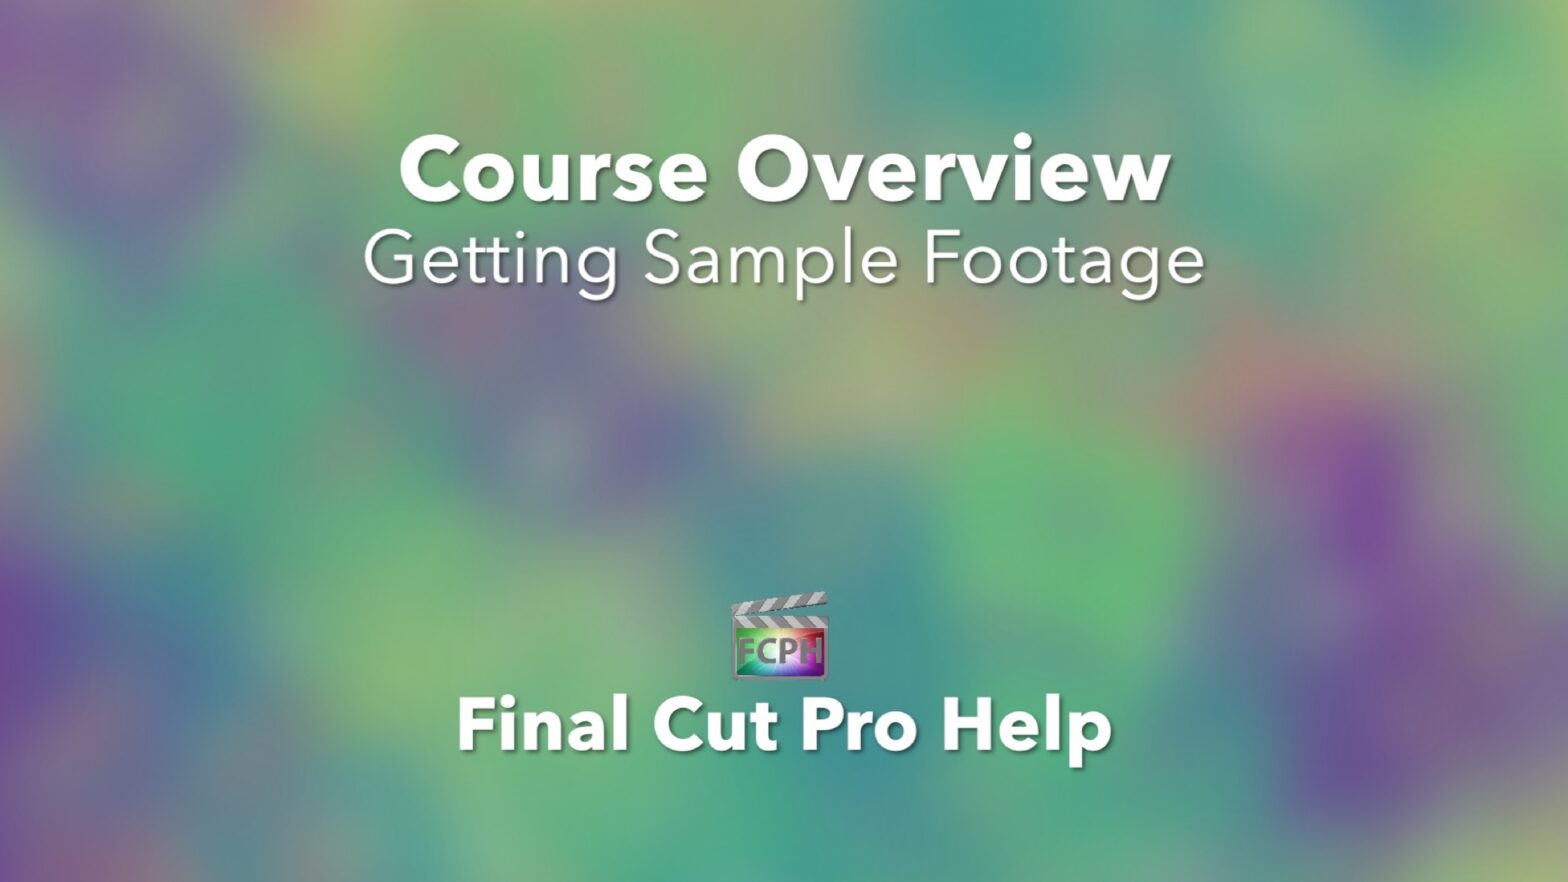 Course Overview Getting Sample Footage